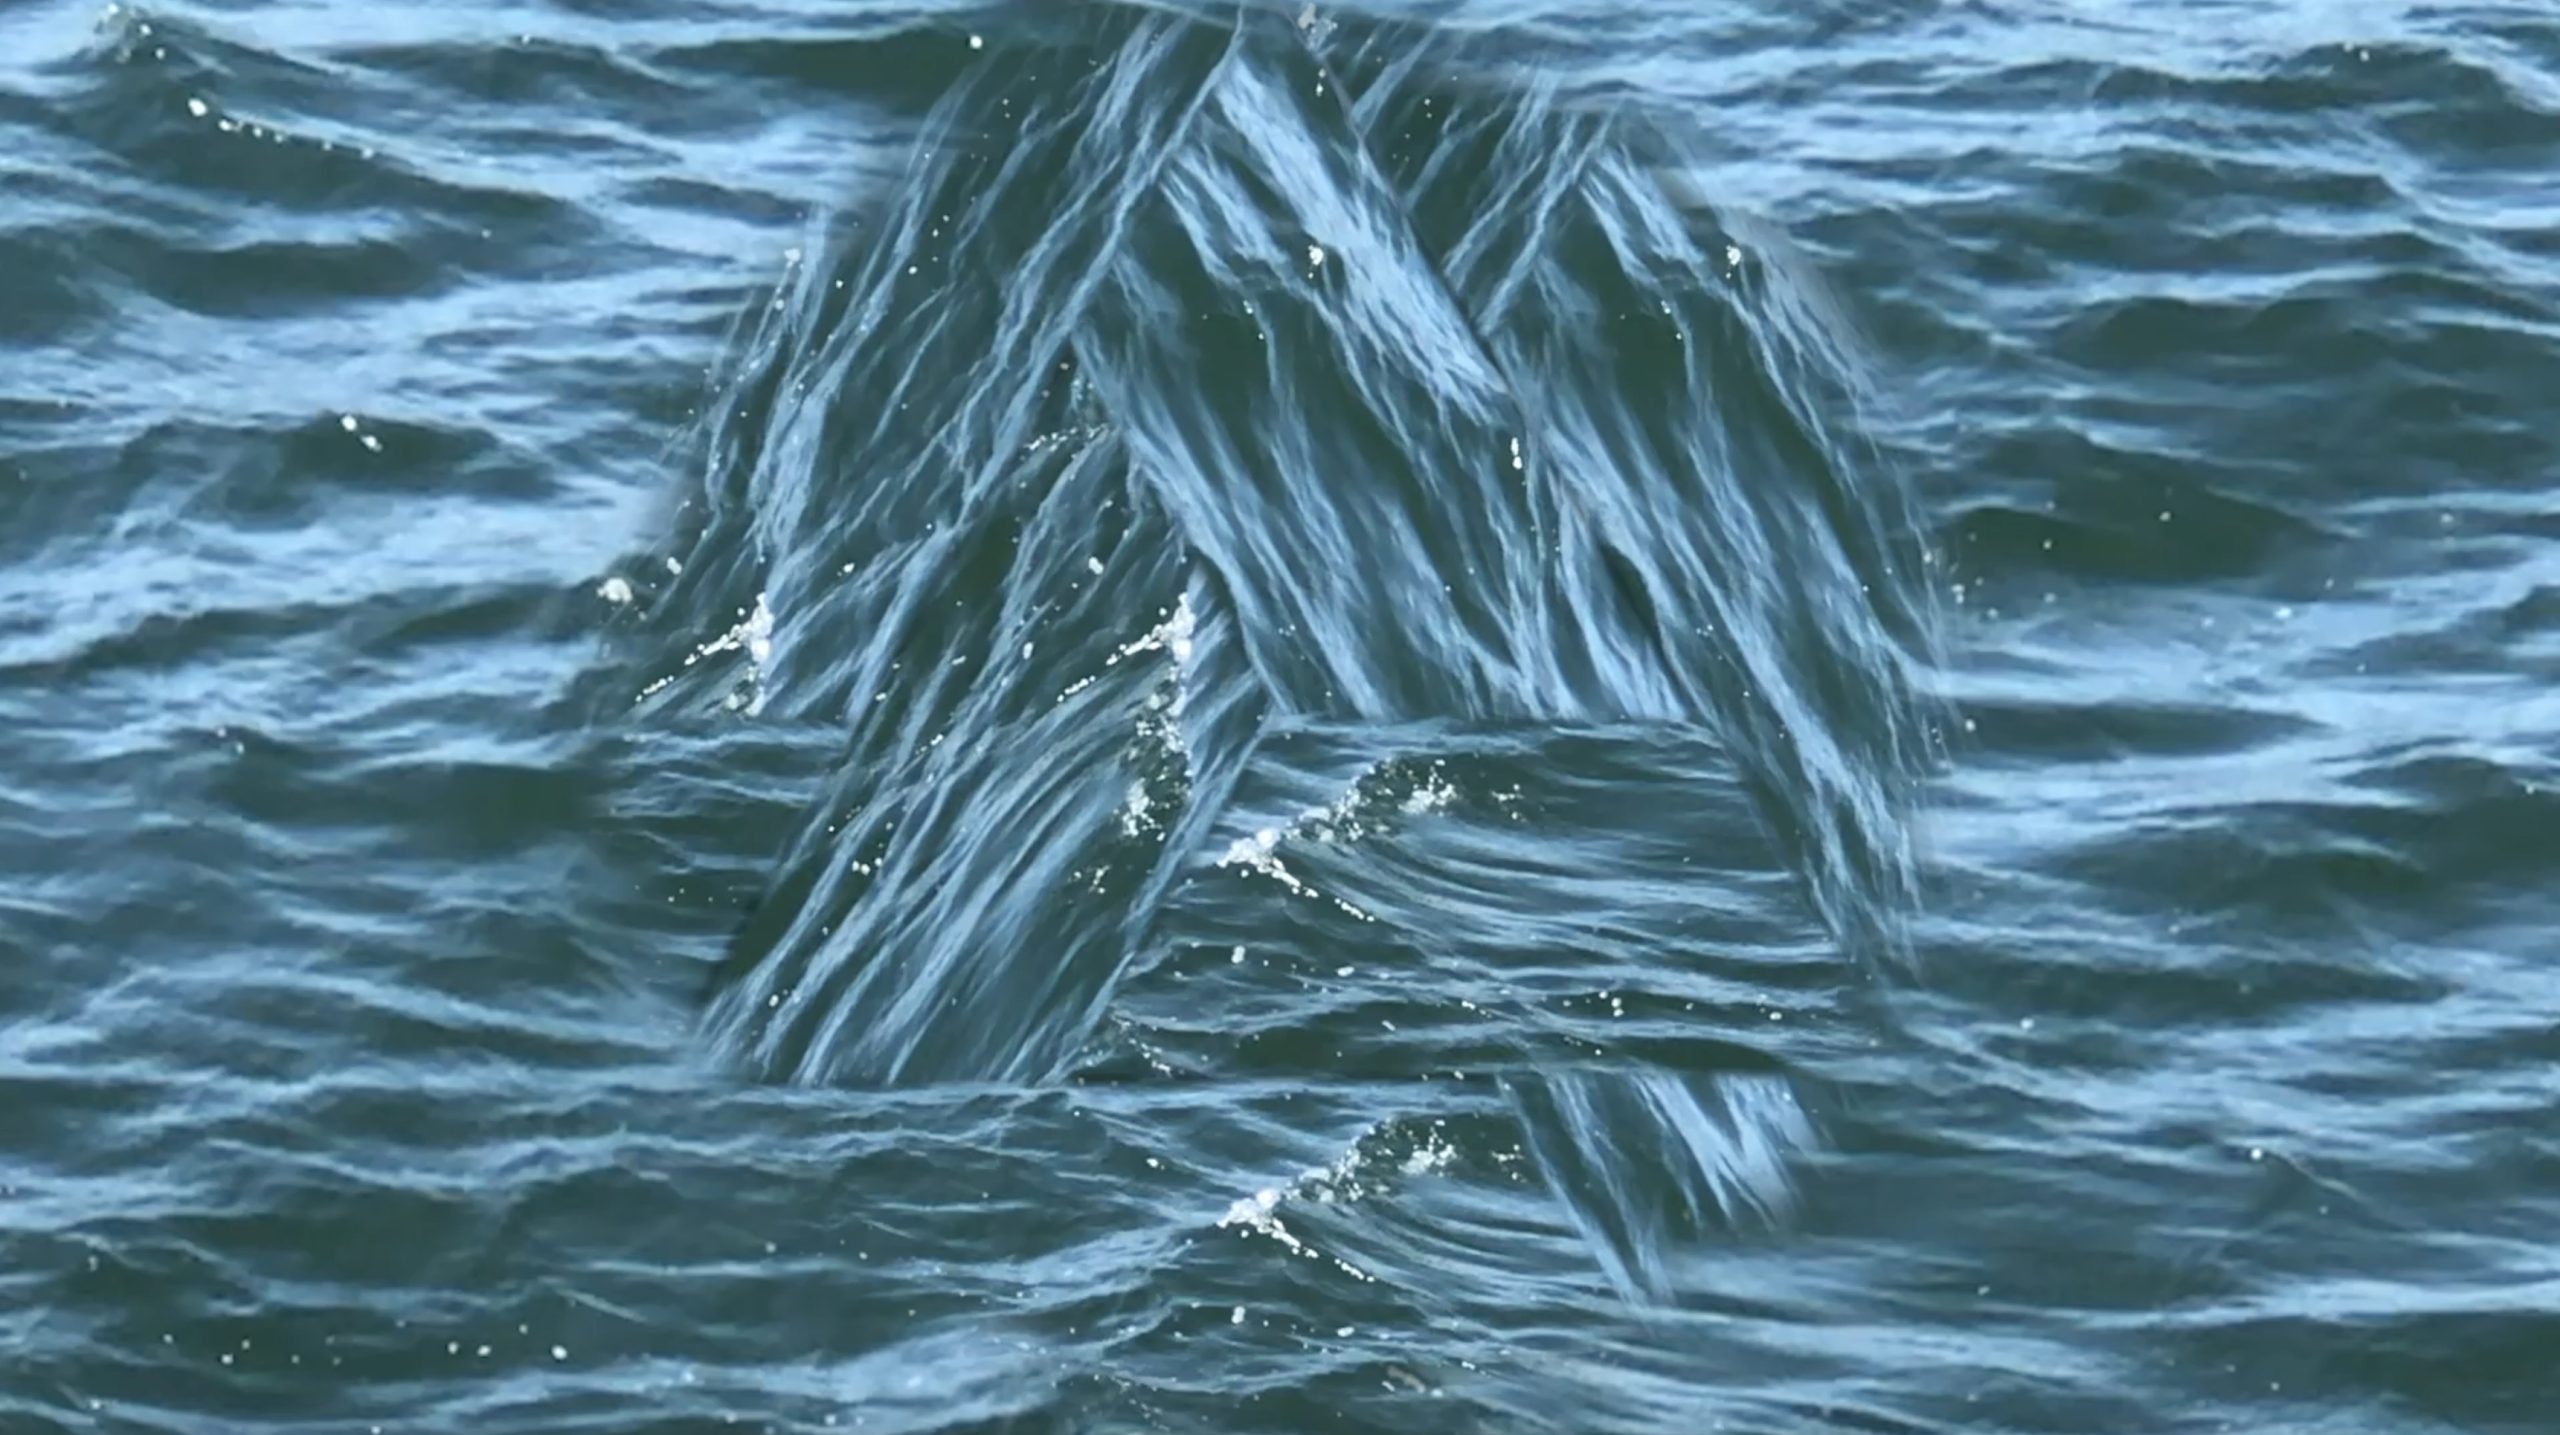 The mutability and mobility of water. Weave(2021) film still. Photo Mandy Hawkhead